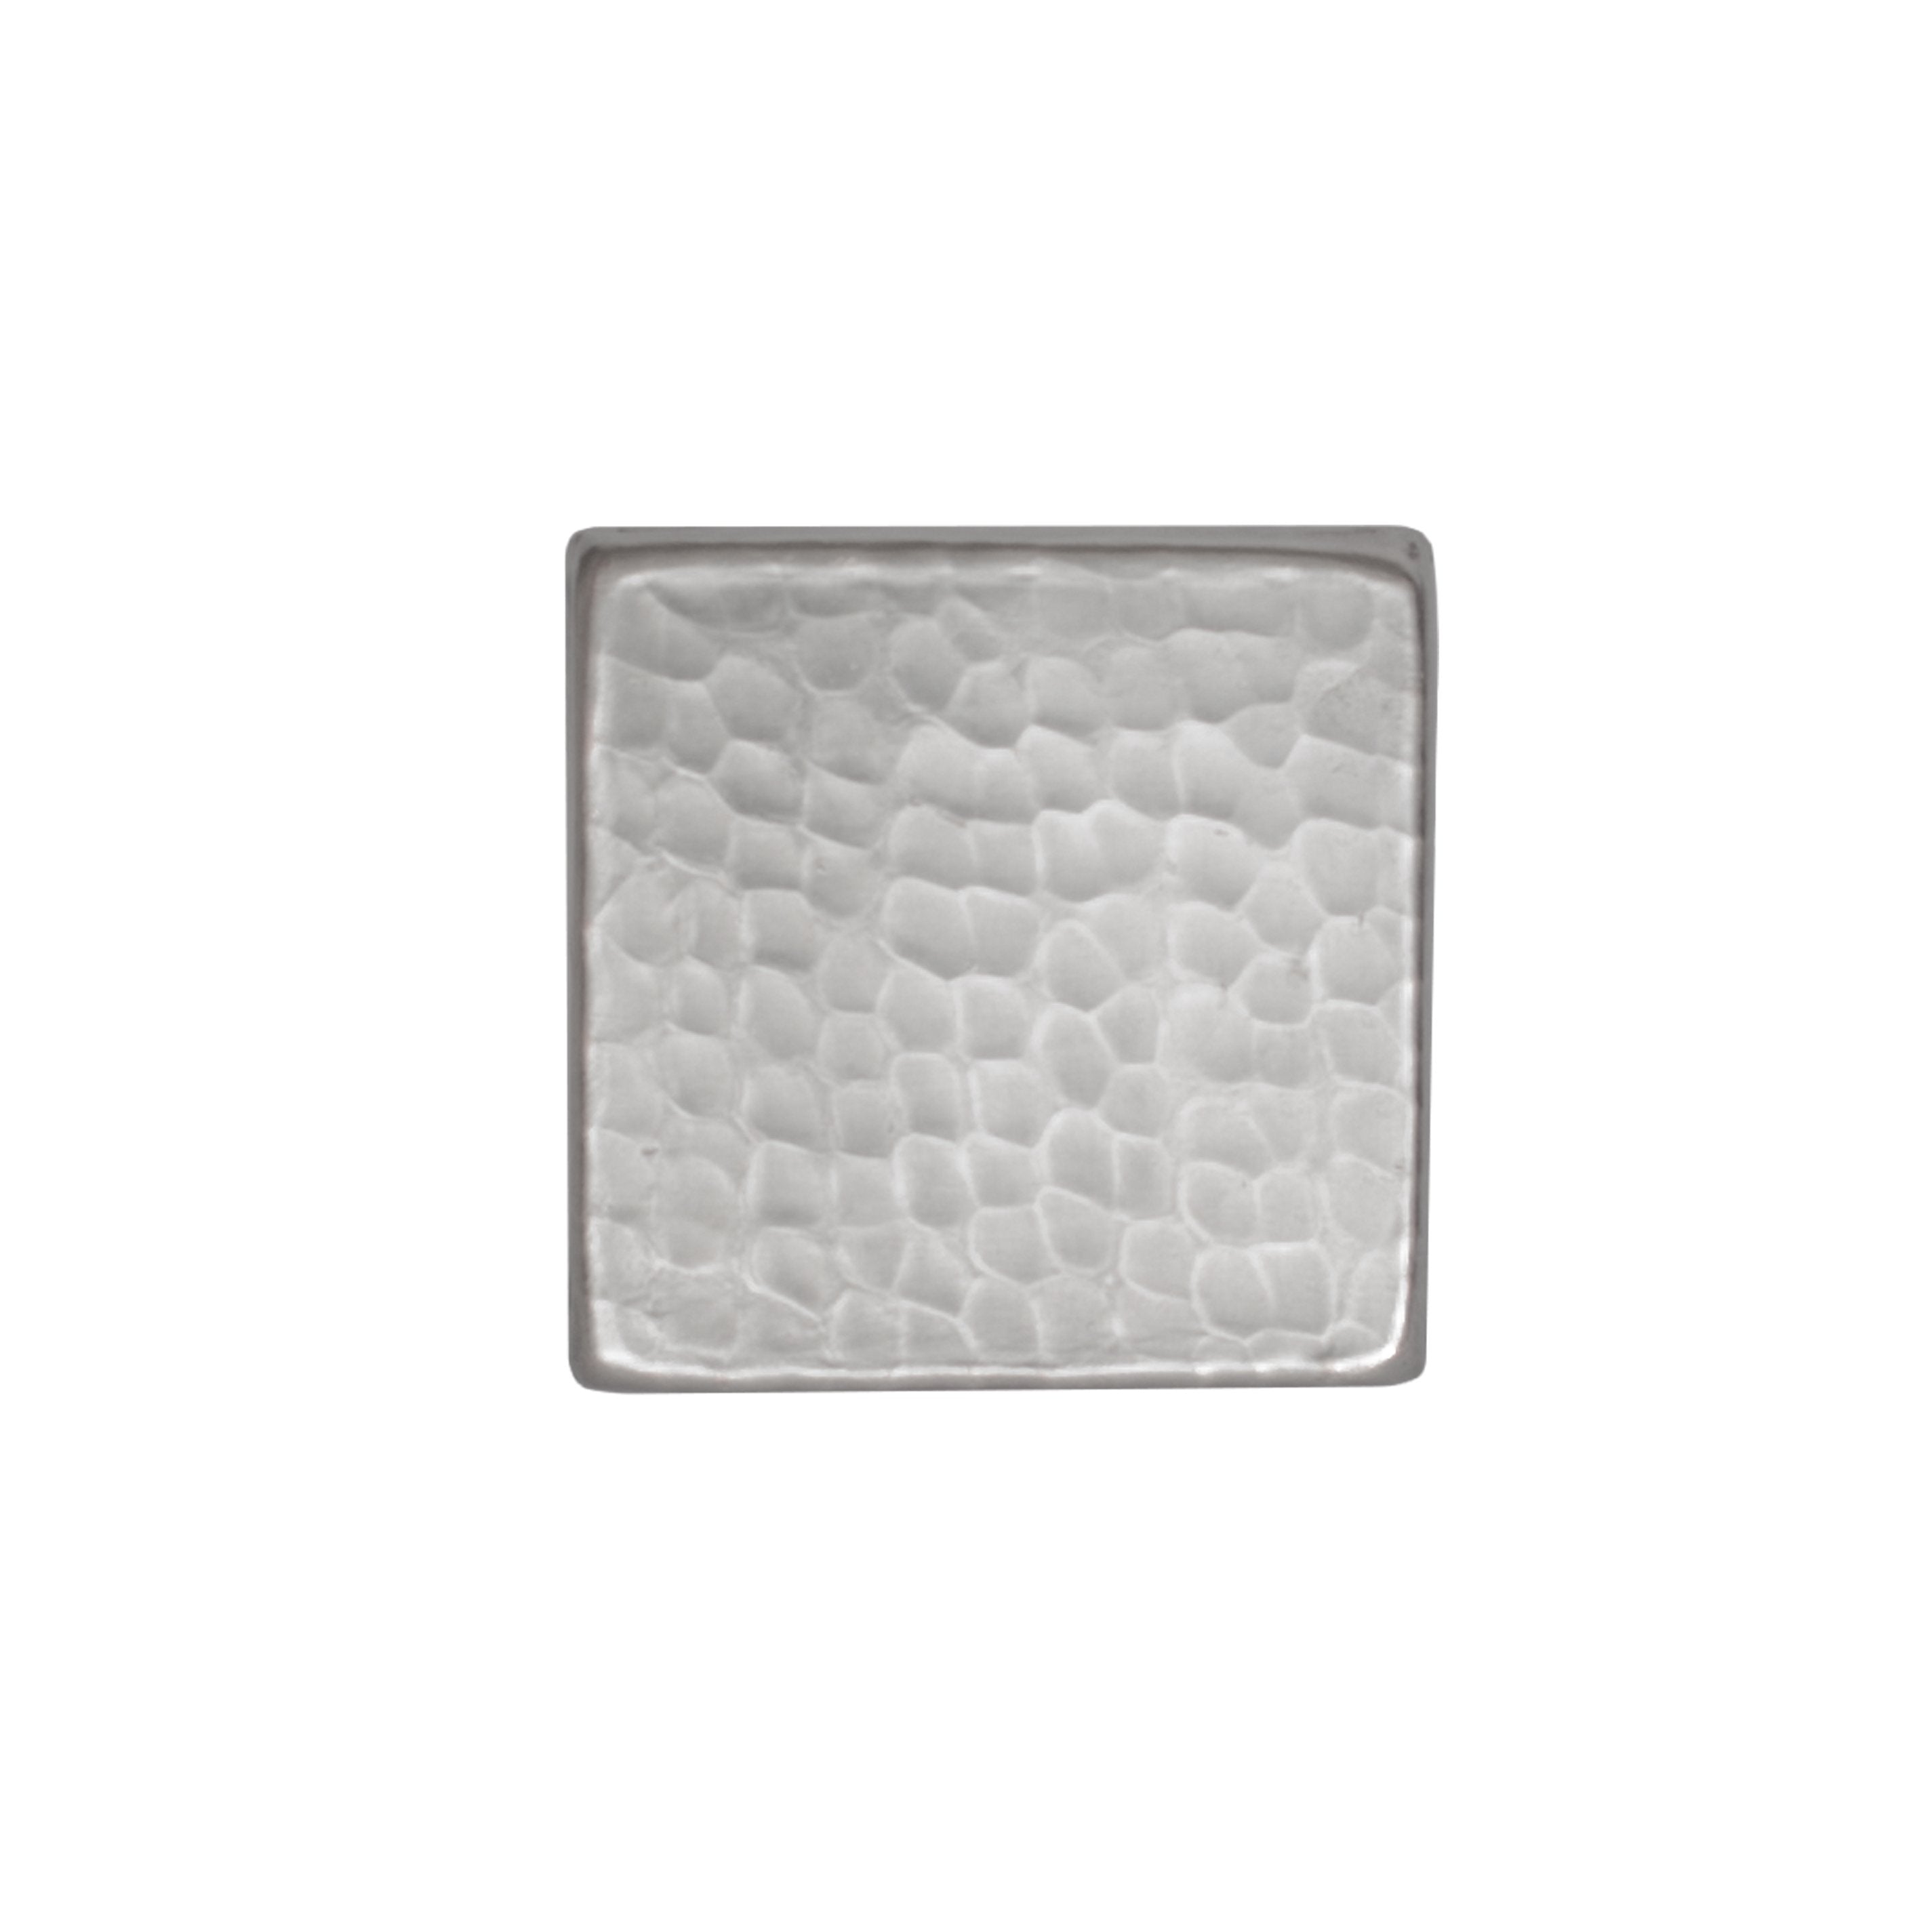 Premier Copper Products 2" x 2" Nickel Plated Hammered Copper Tile -DirectSinks